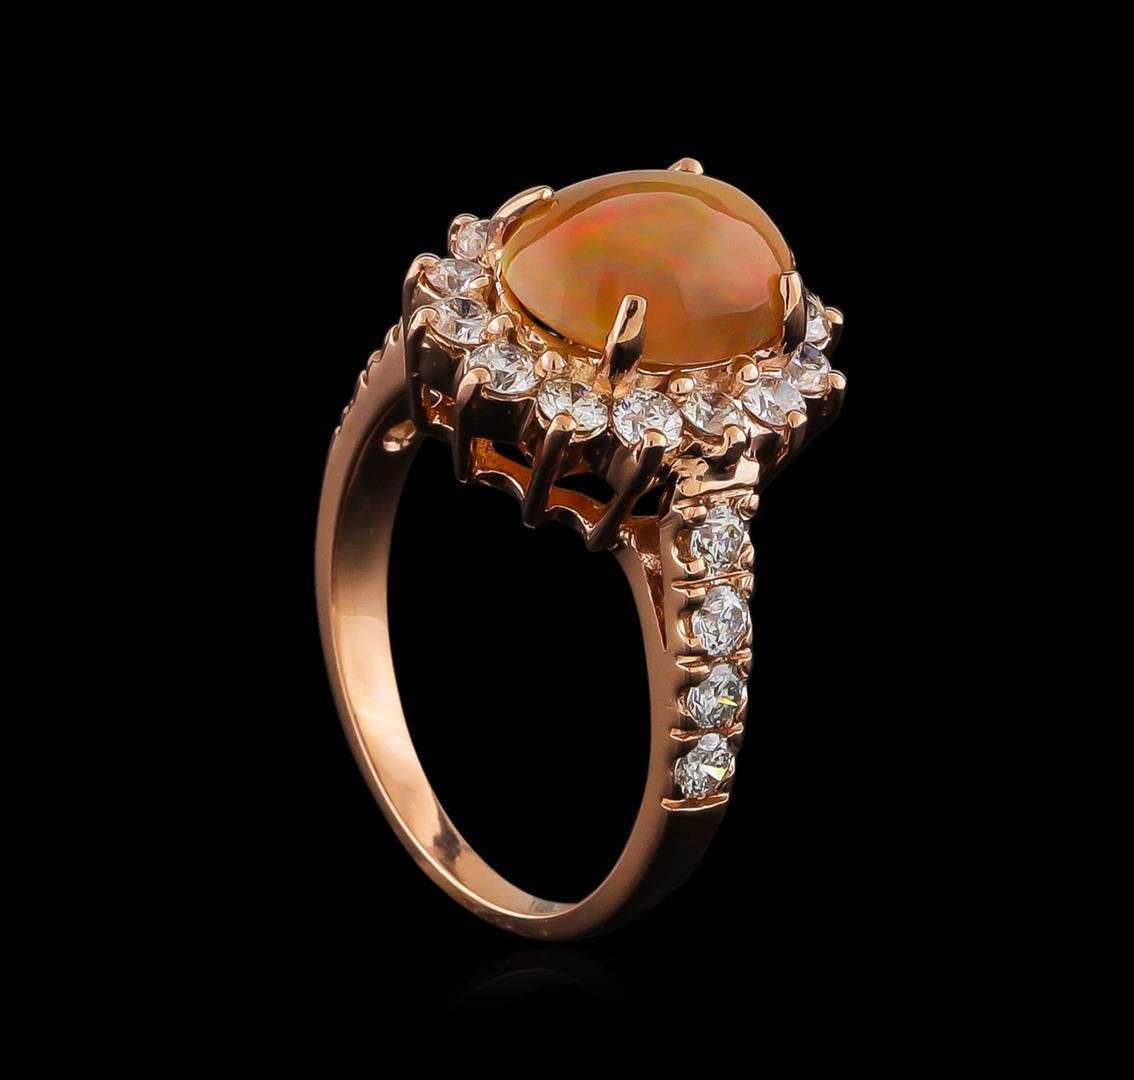 1.68 ctw Opal and Diamond Ring - 14KT Rose Gold